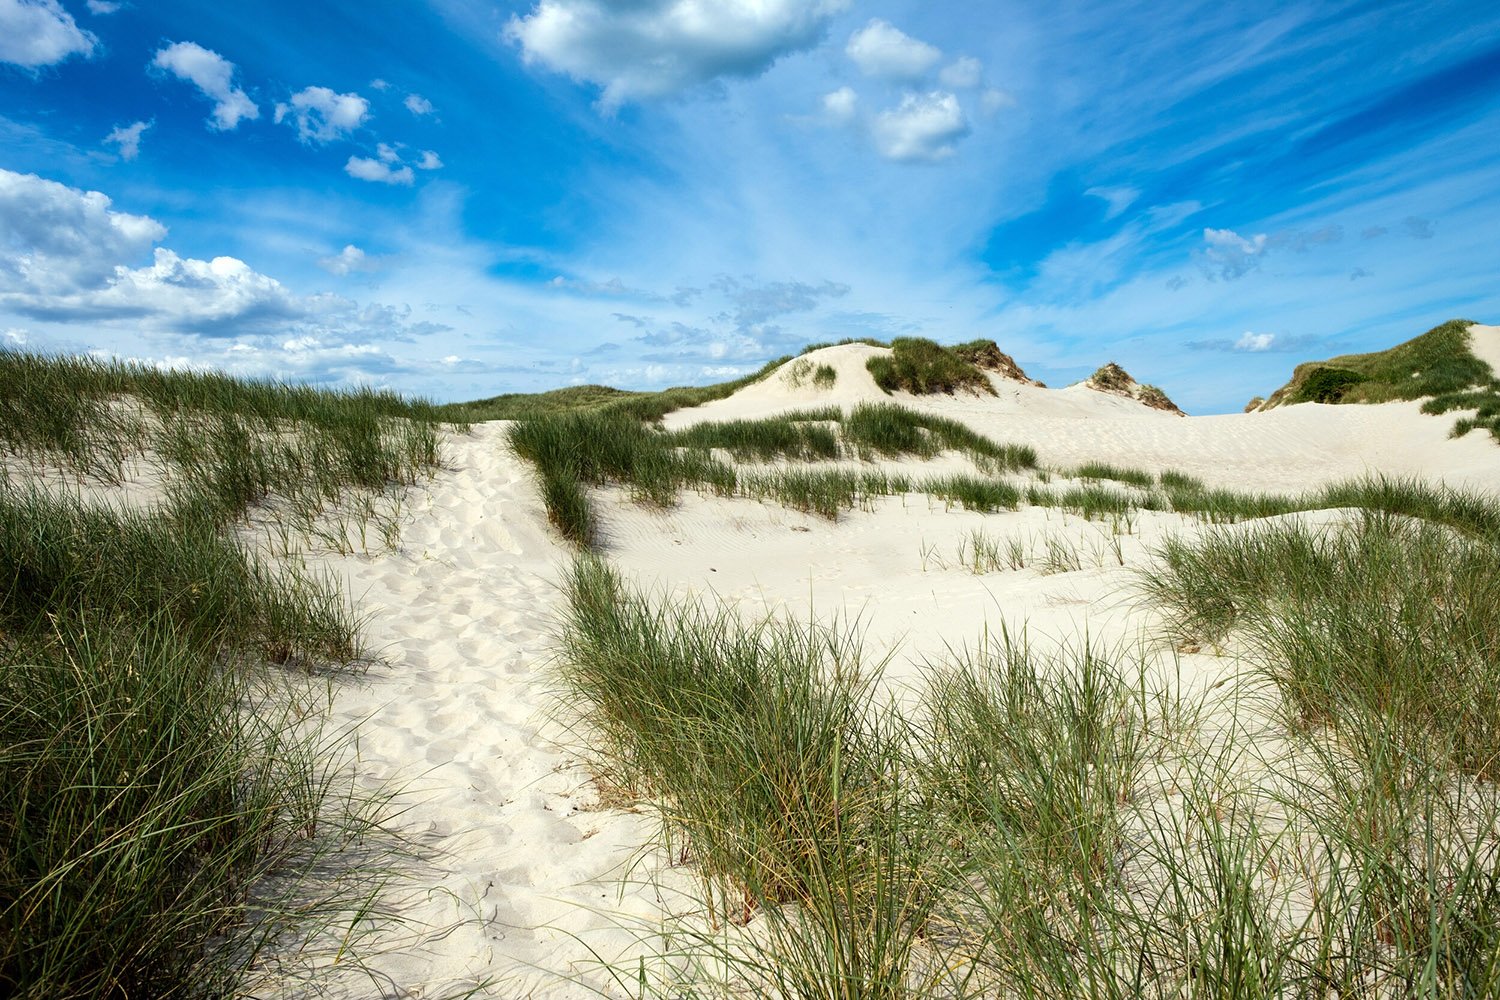 The Sand Dunes leading to the beach at Bjerregaard, Denmark